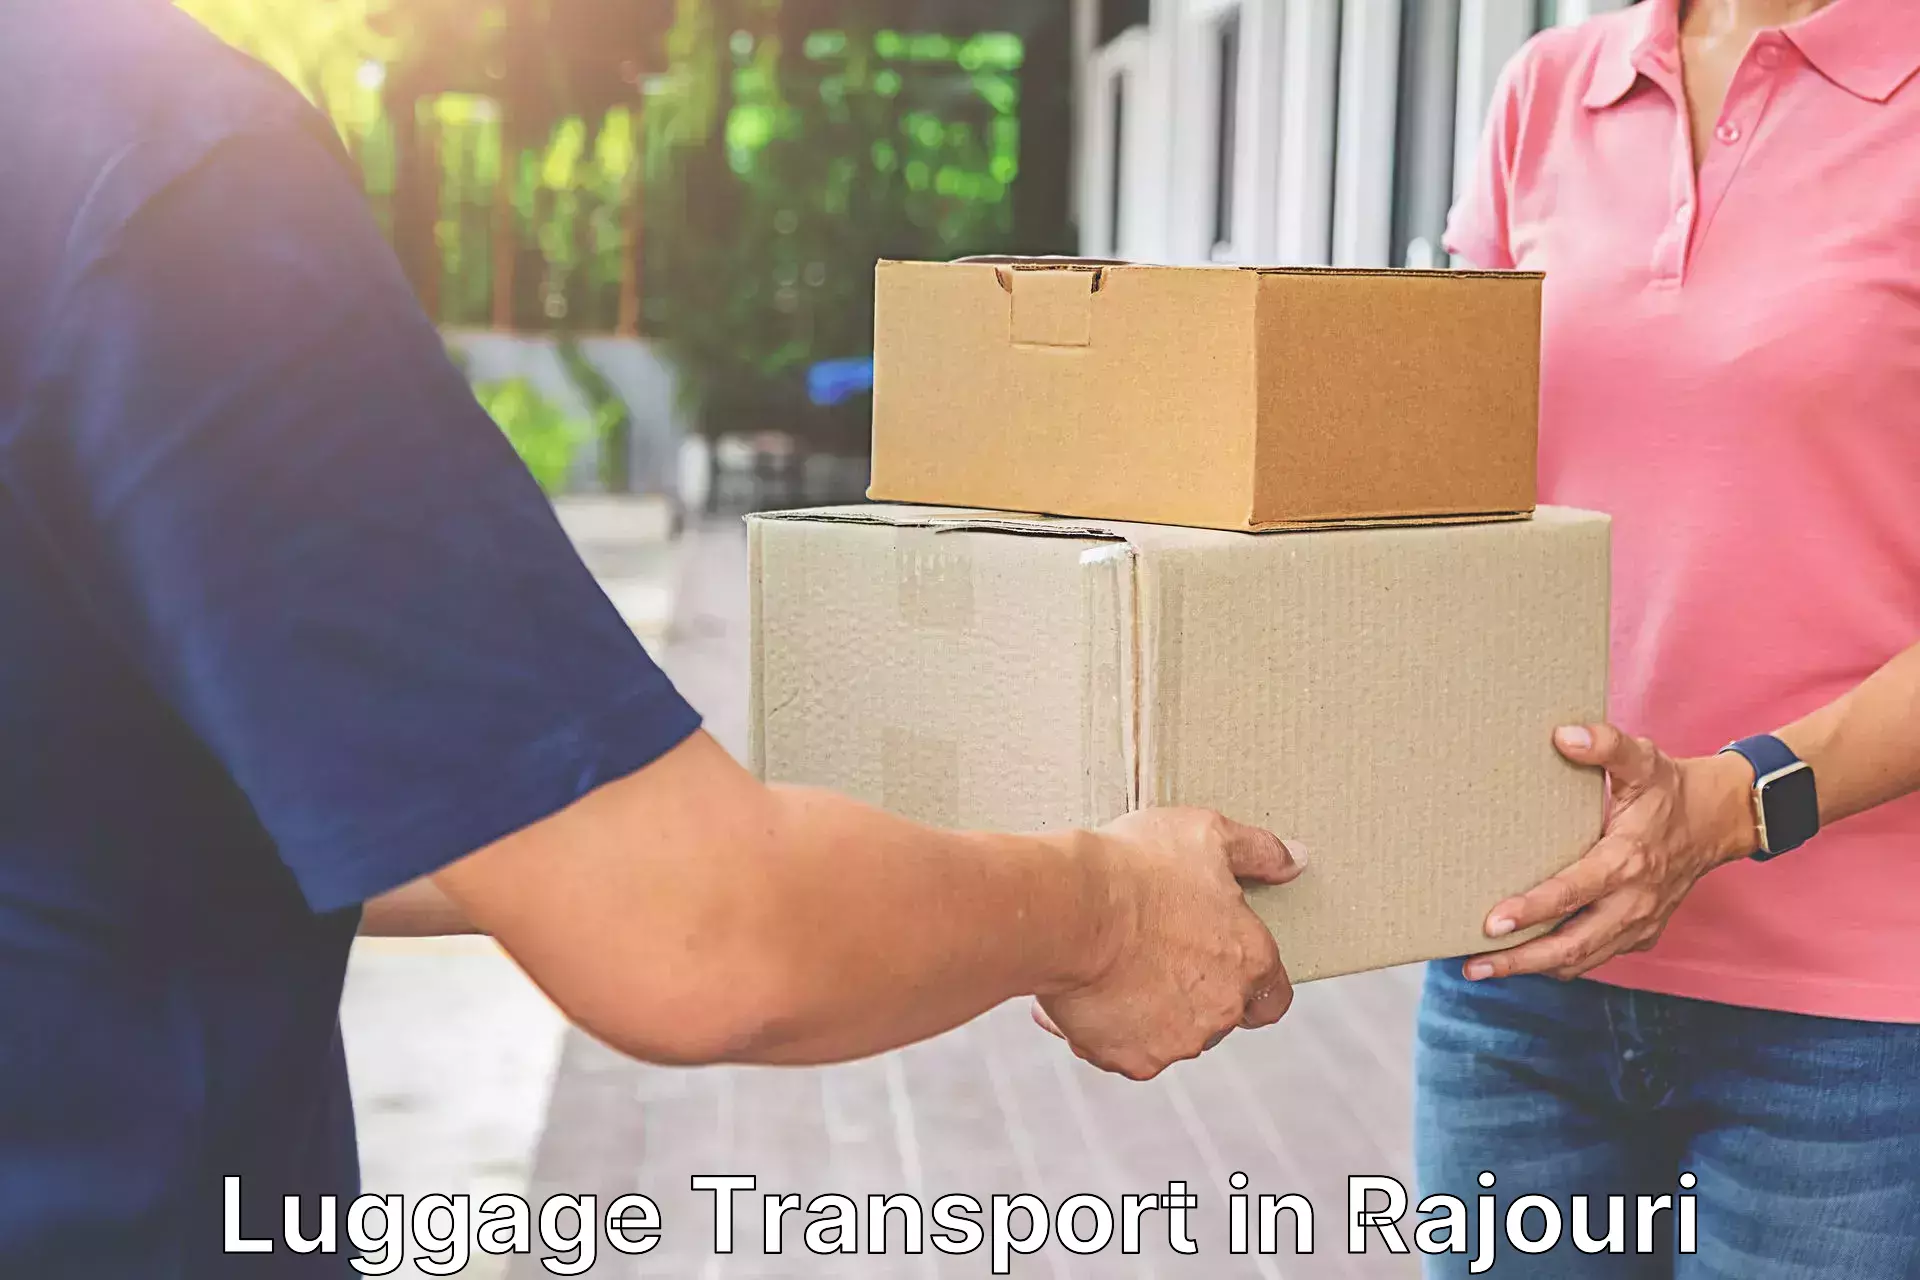 Baggage handling services in Rajouri